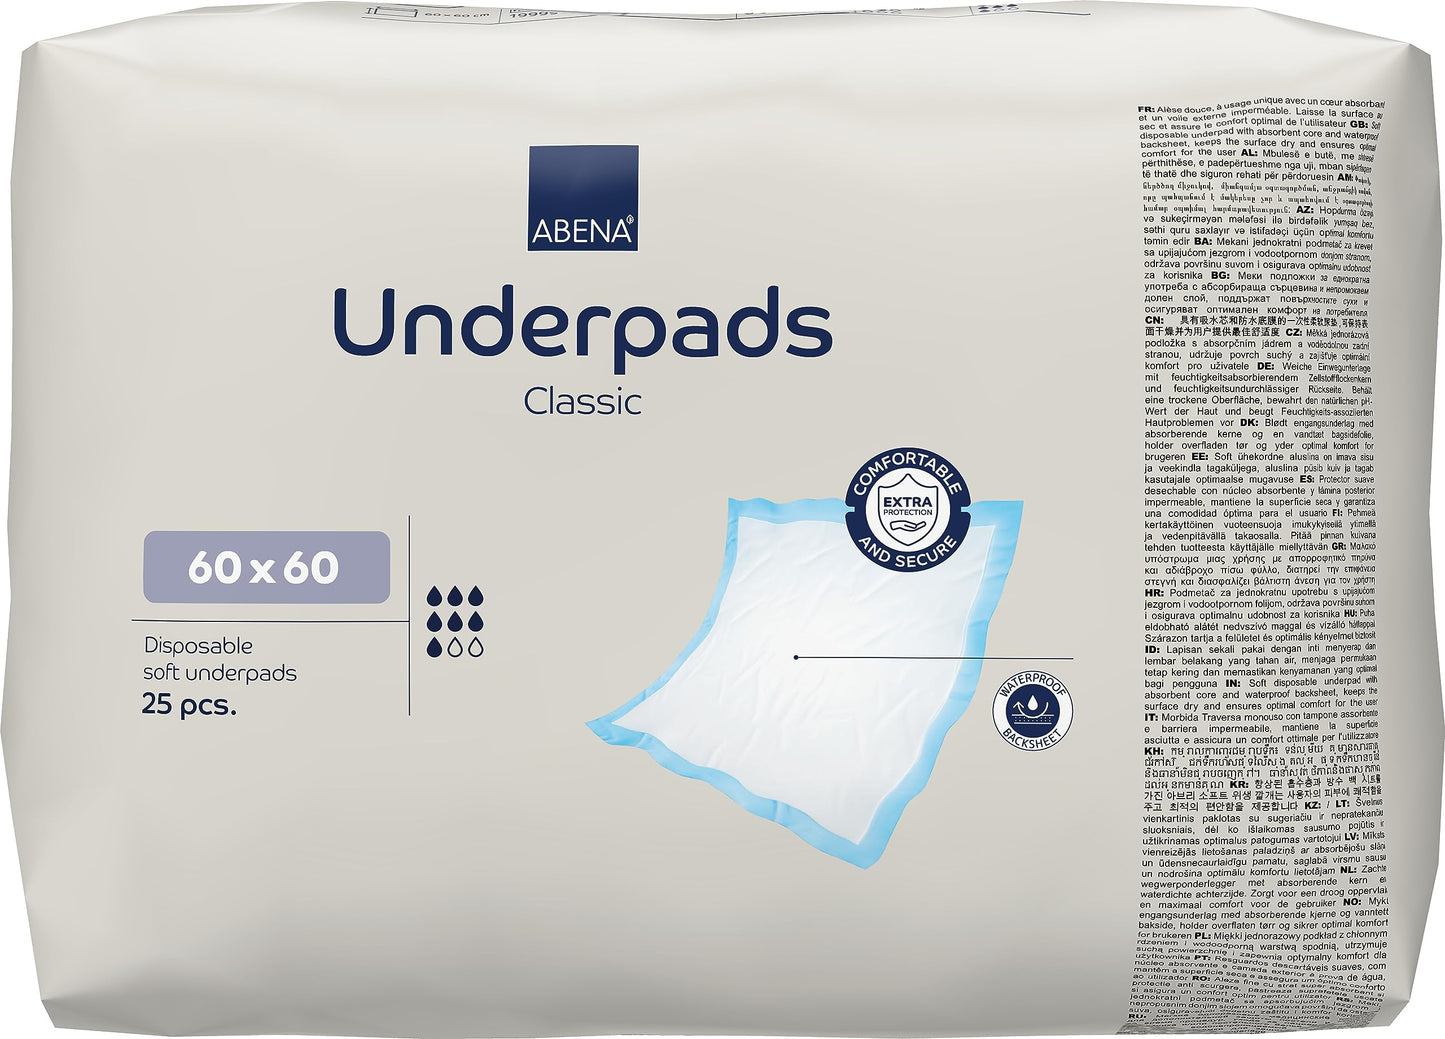 Abena Underpad Classic, Disposable Underpads, Eco-Friendly Incontinence Bed Pads, Soft & Secure Bed Protectors for Incontinence - 60x60cm, 25 Count (Pack of 1)